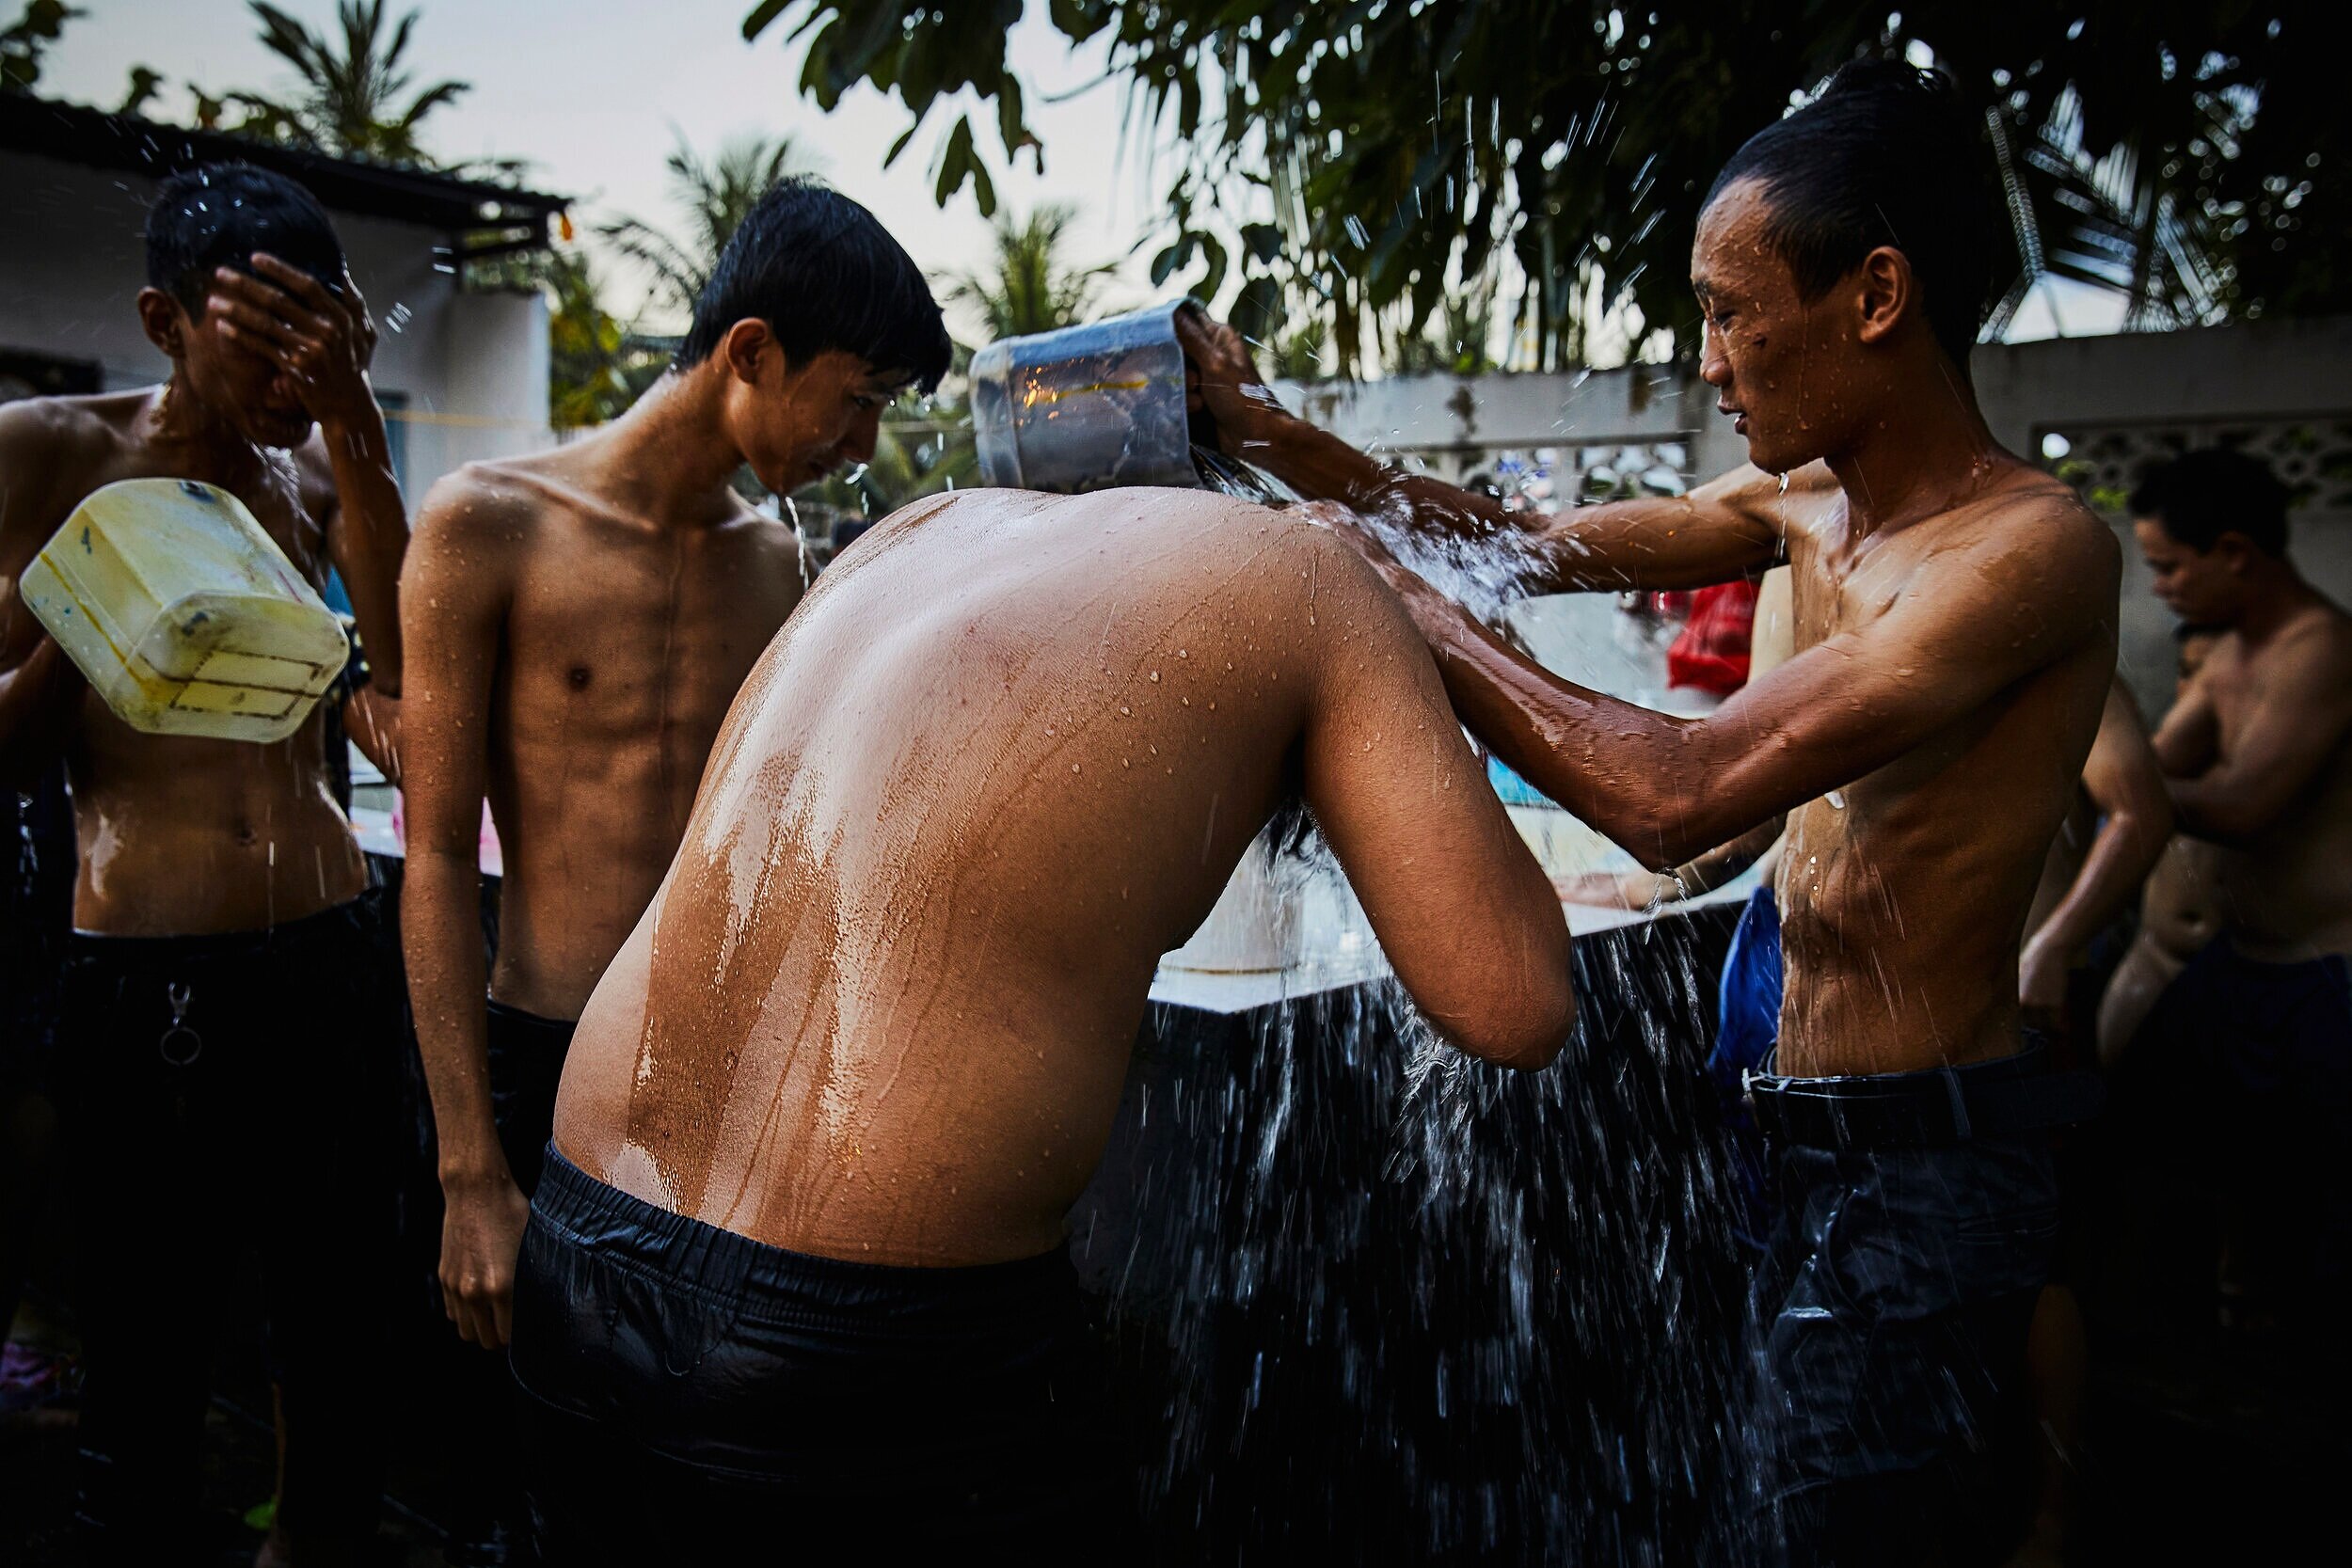  Beach-goers use packed communal shower areas to wash off the sand and sea as all believed that Vietnam had beaten the Coronavirus, after 99 days with no new infections. Unfortunately, a 2nd wave in the city of Da Nang forced everyone back under a 6-